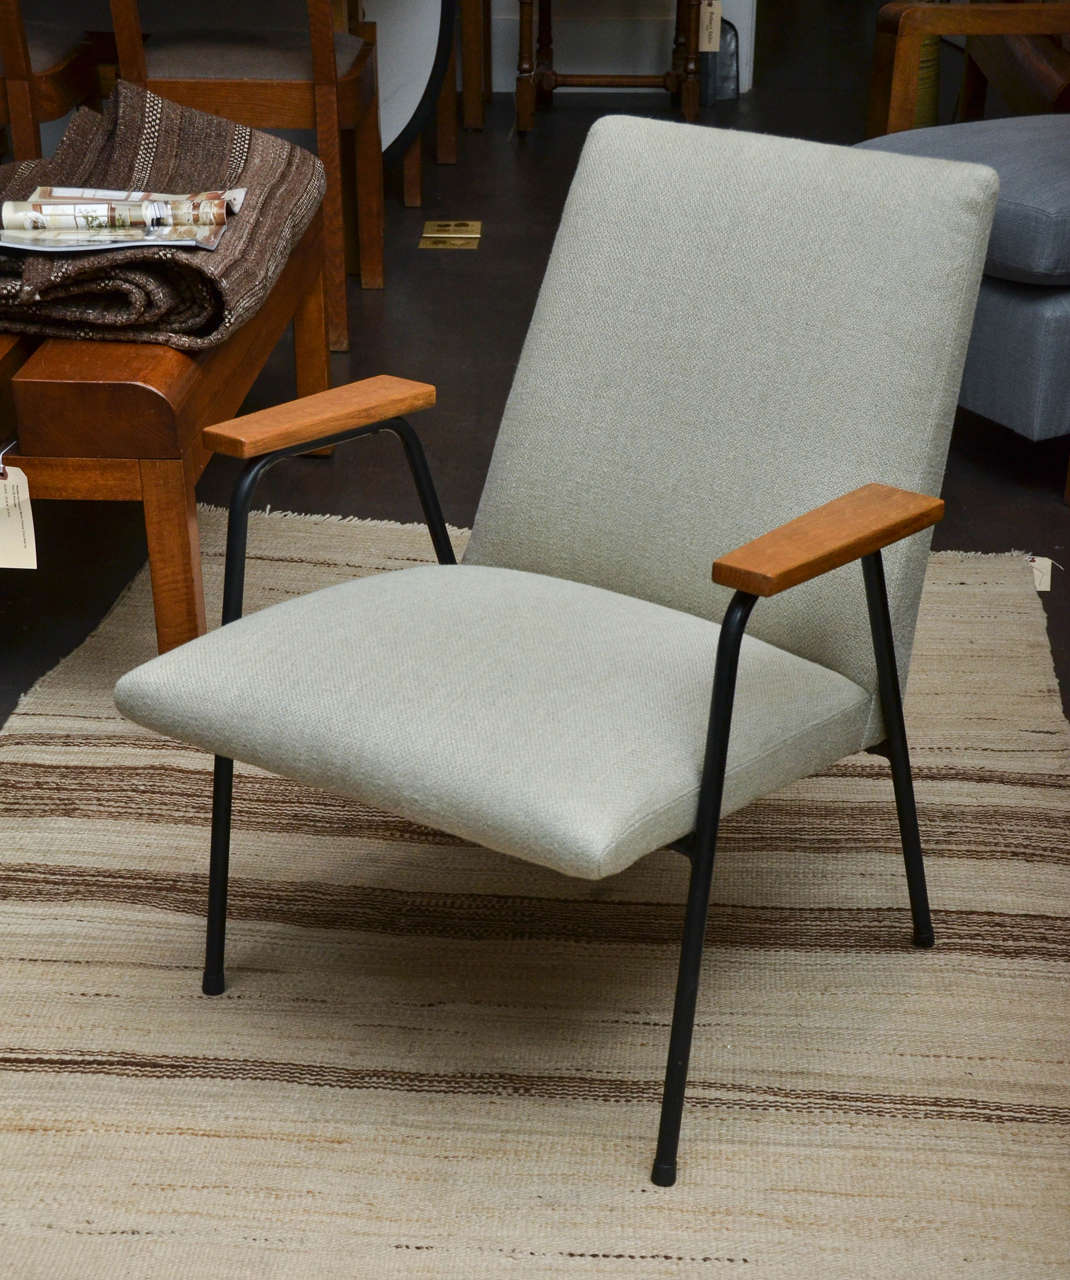 Mid-Century Upholstered Metal Armchair in the Manner of Prouve, France, c. 1950s

Sleek design consists of a clean tubular metal frame, handsome wooden armrests, and brand new upholstery in a natural linen with pale blue thread integrated into the